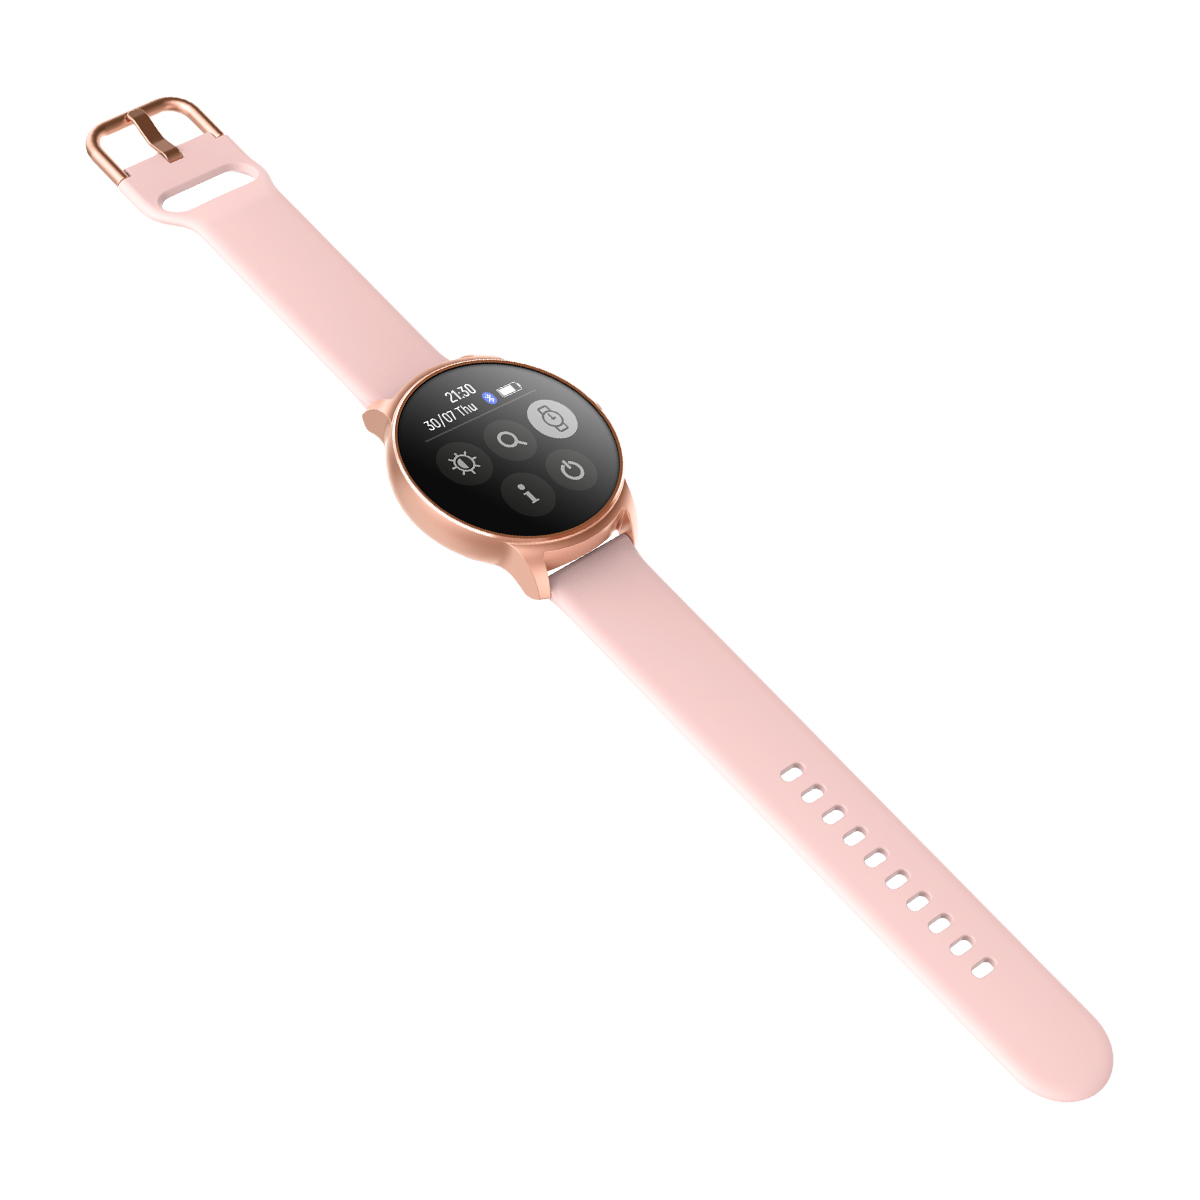 Forever smartwatch ForeVive 2 SB-330 rowe zoto / 9